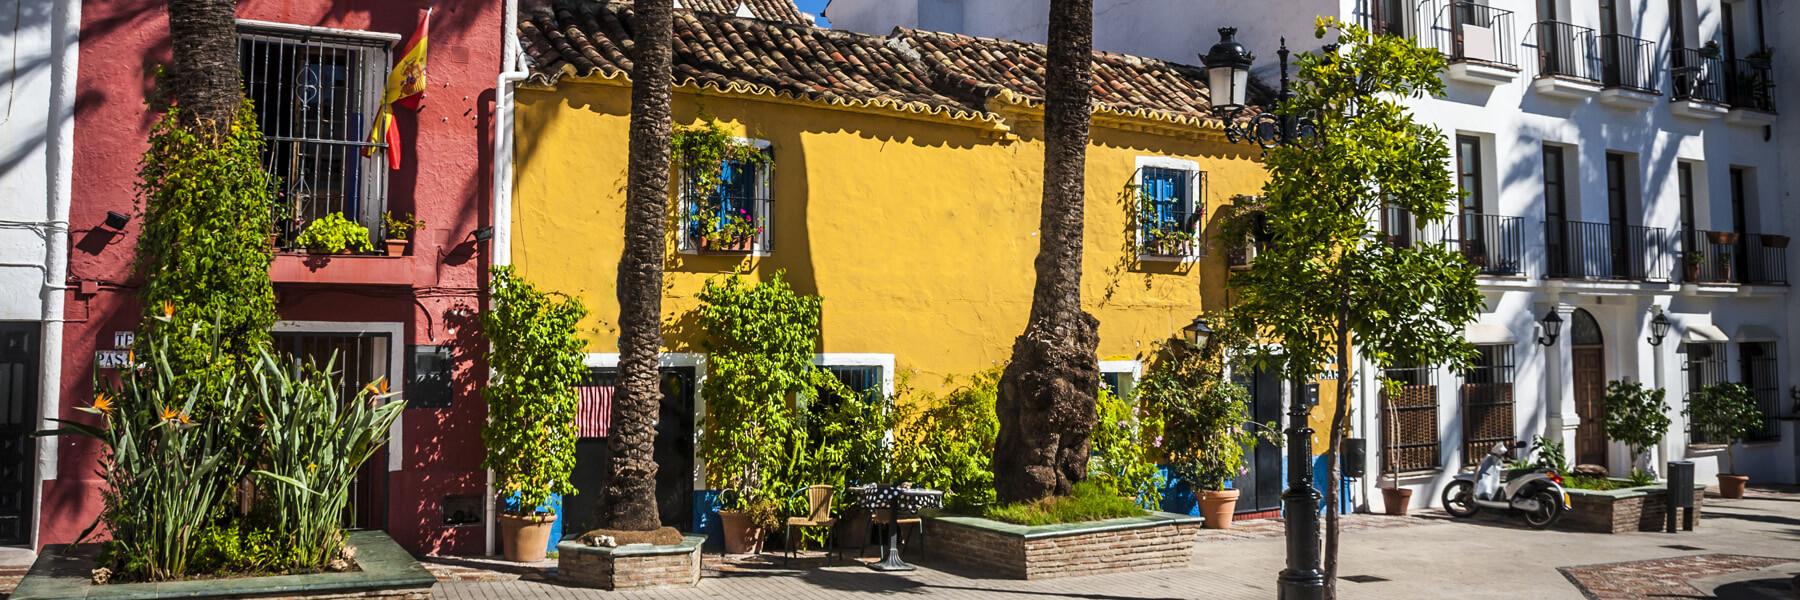 Things to do in Marbella: Our picks for a sunny weekend escape